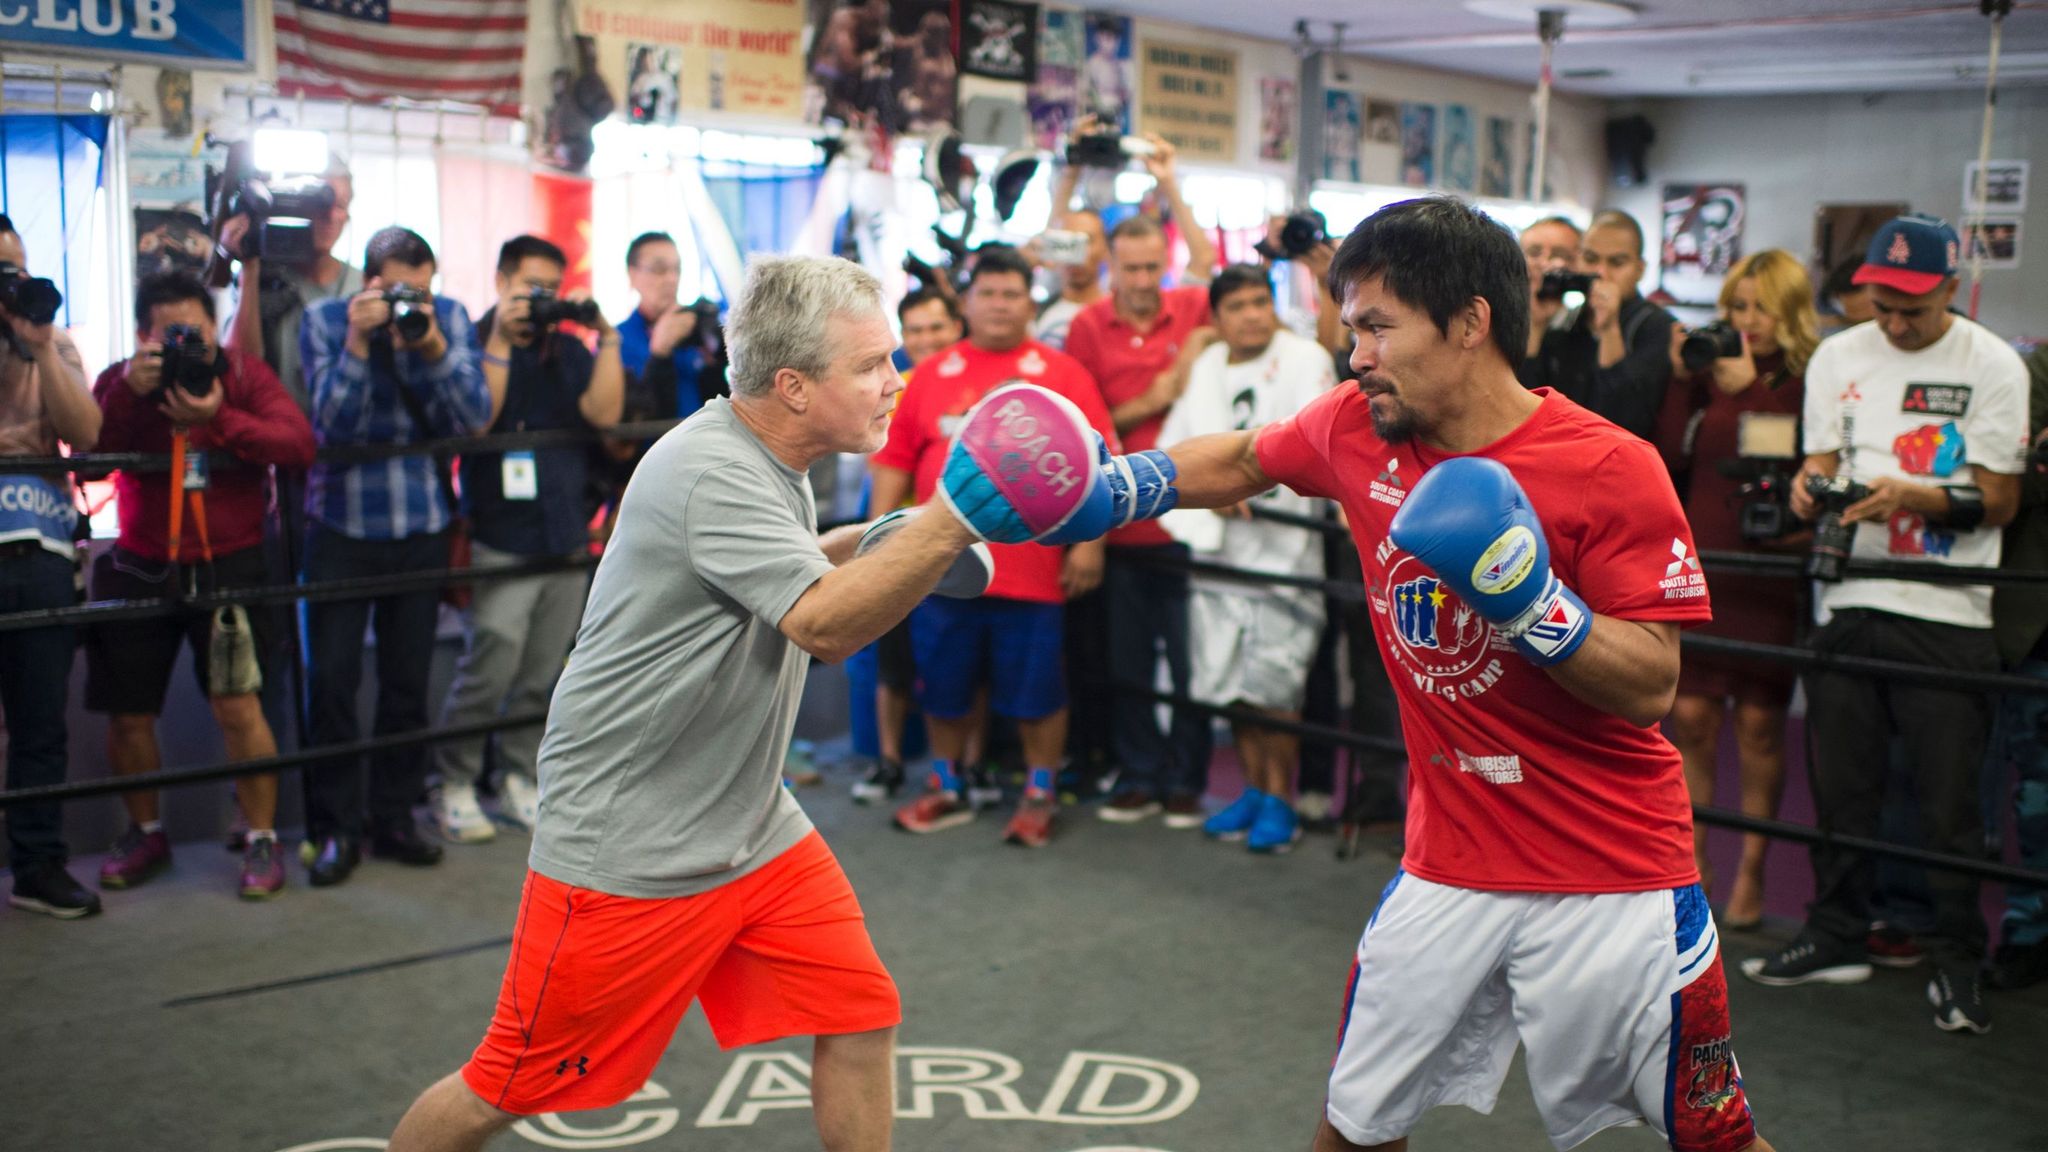 Freddie Roach hurt by Manny Pacquiao snub after split Boxing News Sky Sports